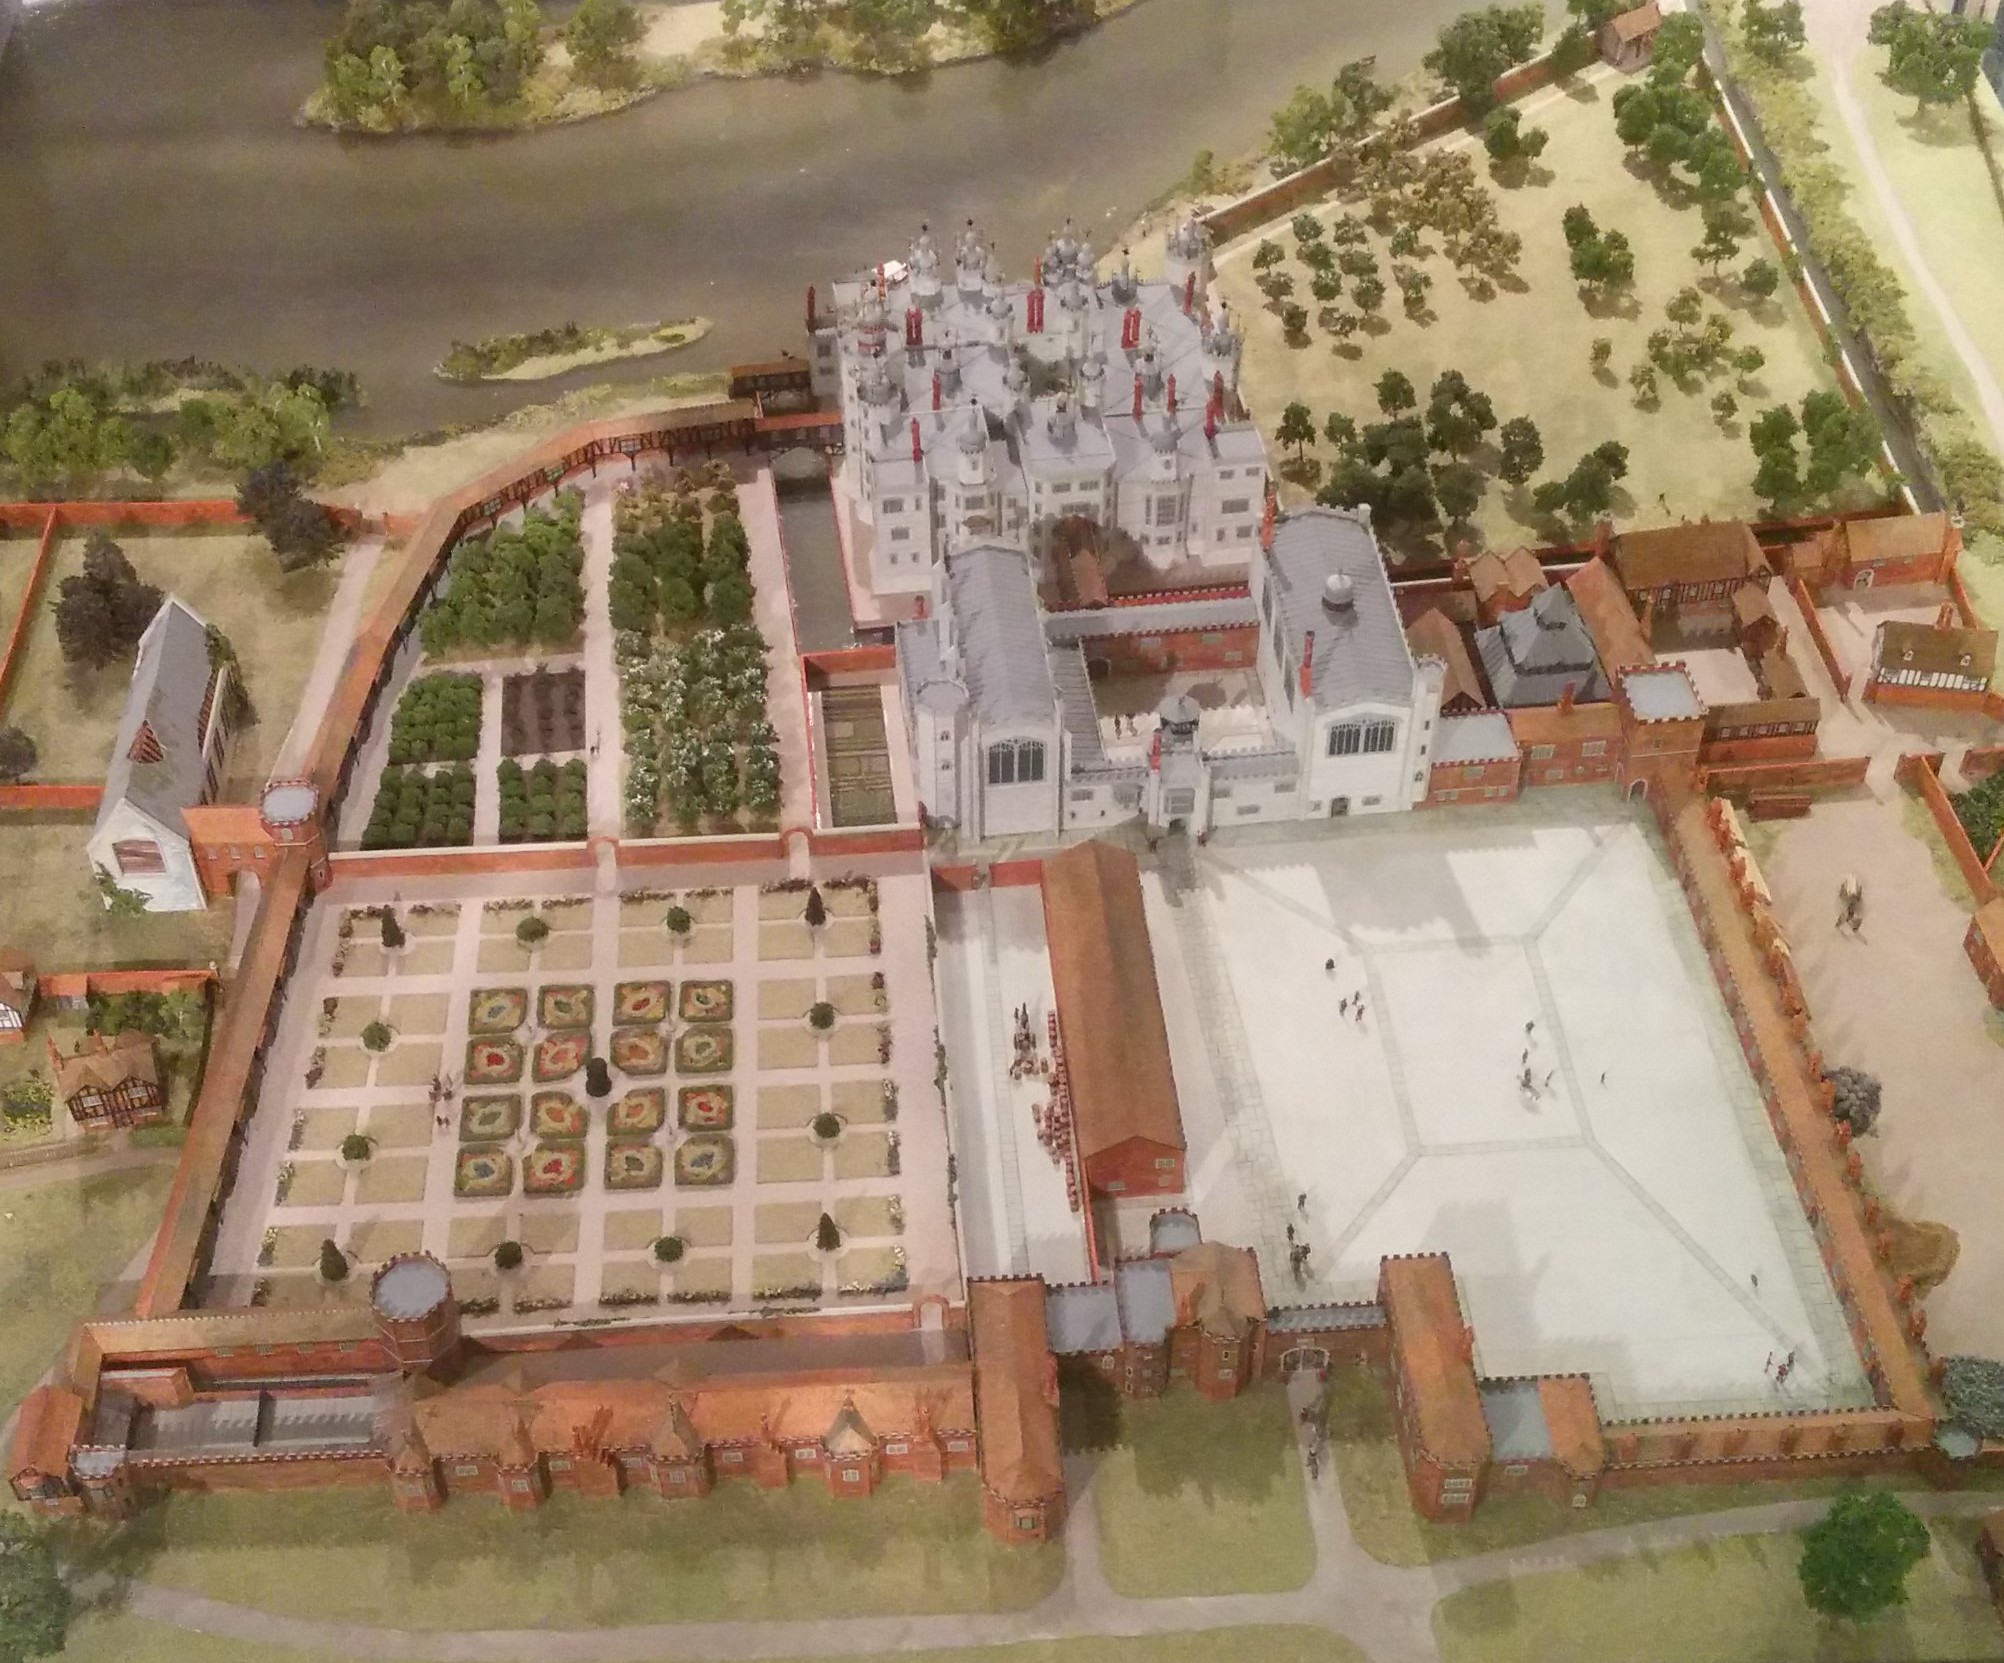 Model of Richmond Palace - the place of Elizabeth I's death